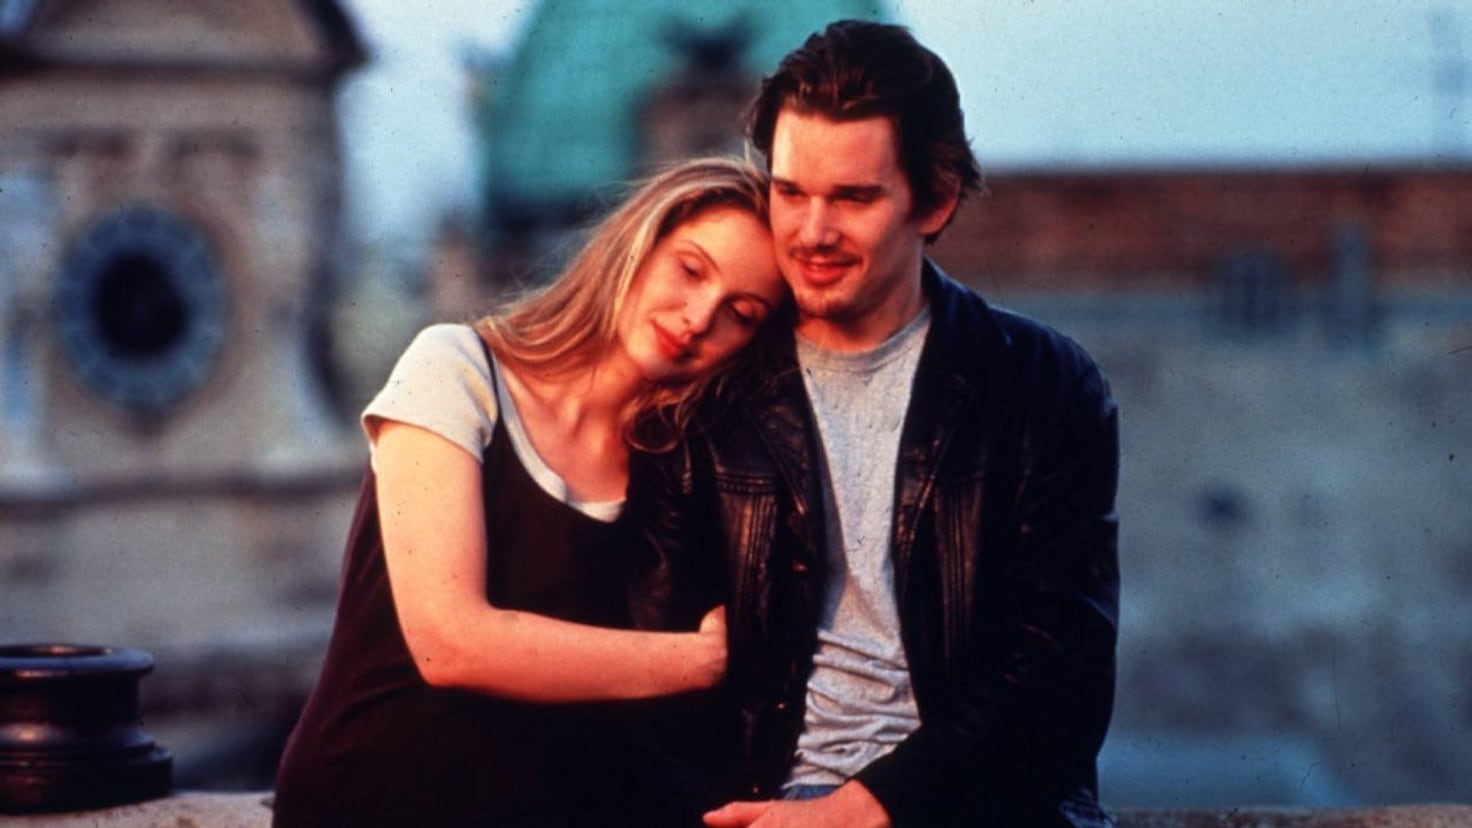 Before dawn: the sad love story that was born on June 16, 30 years ago
